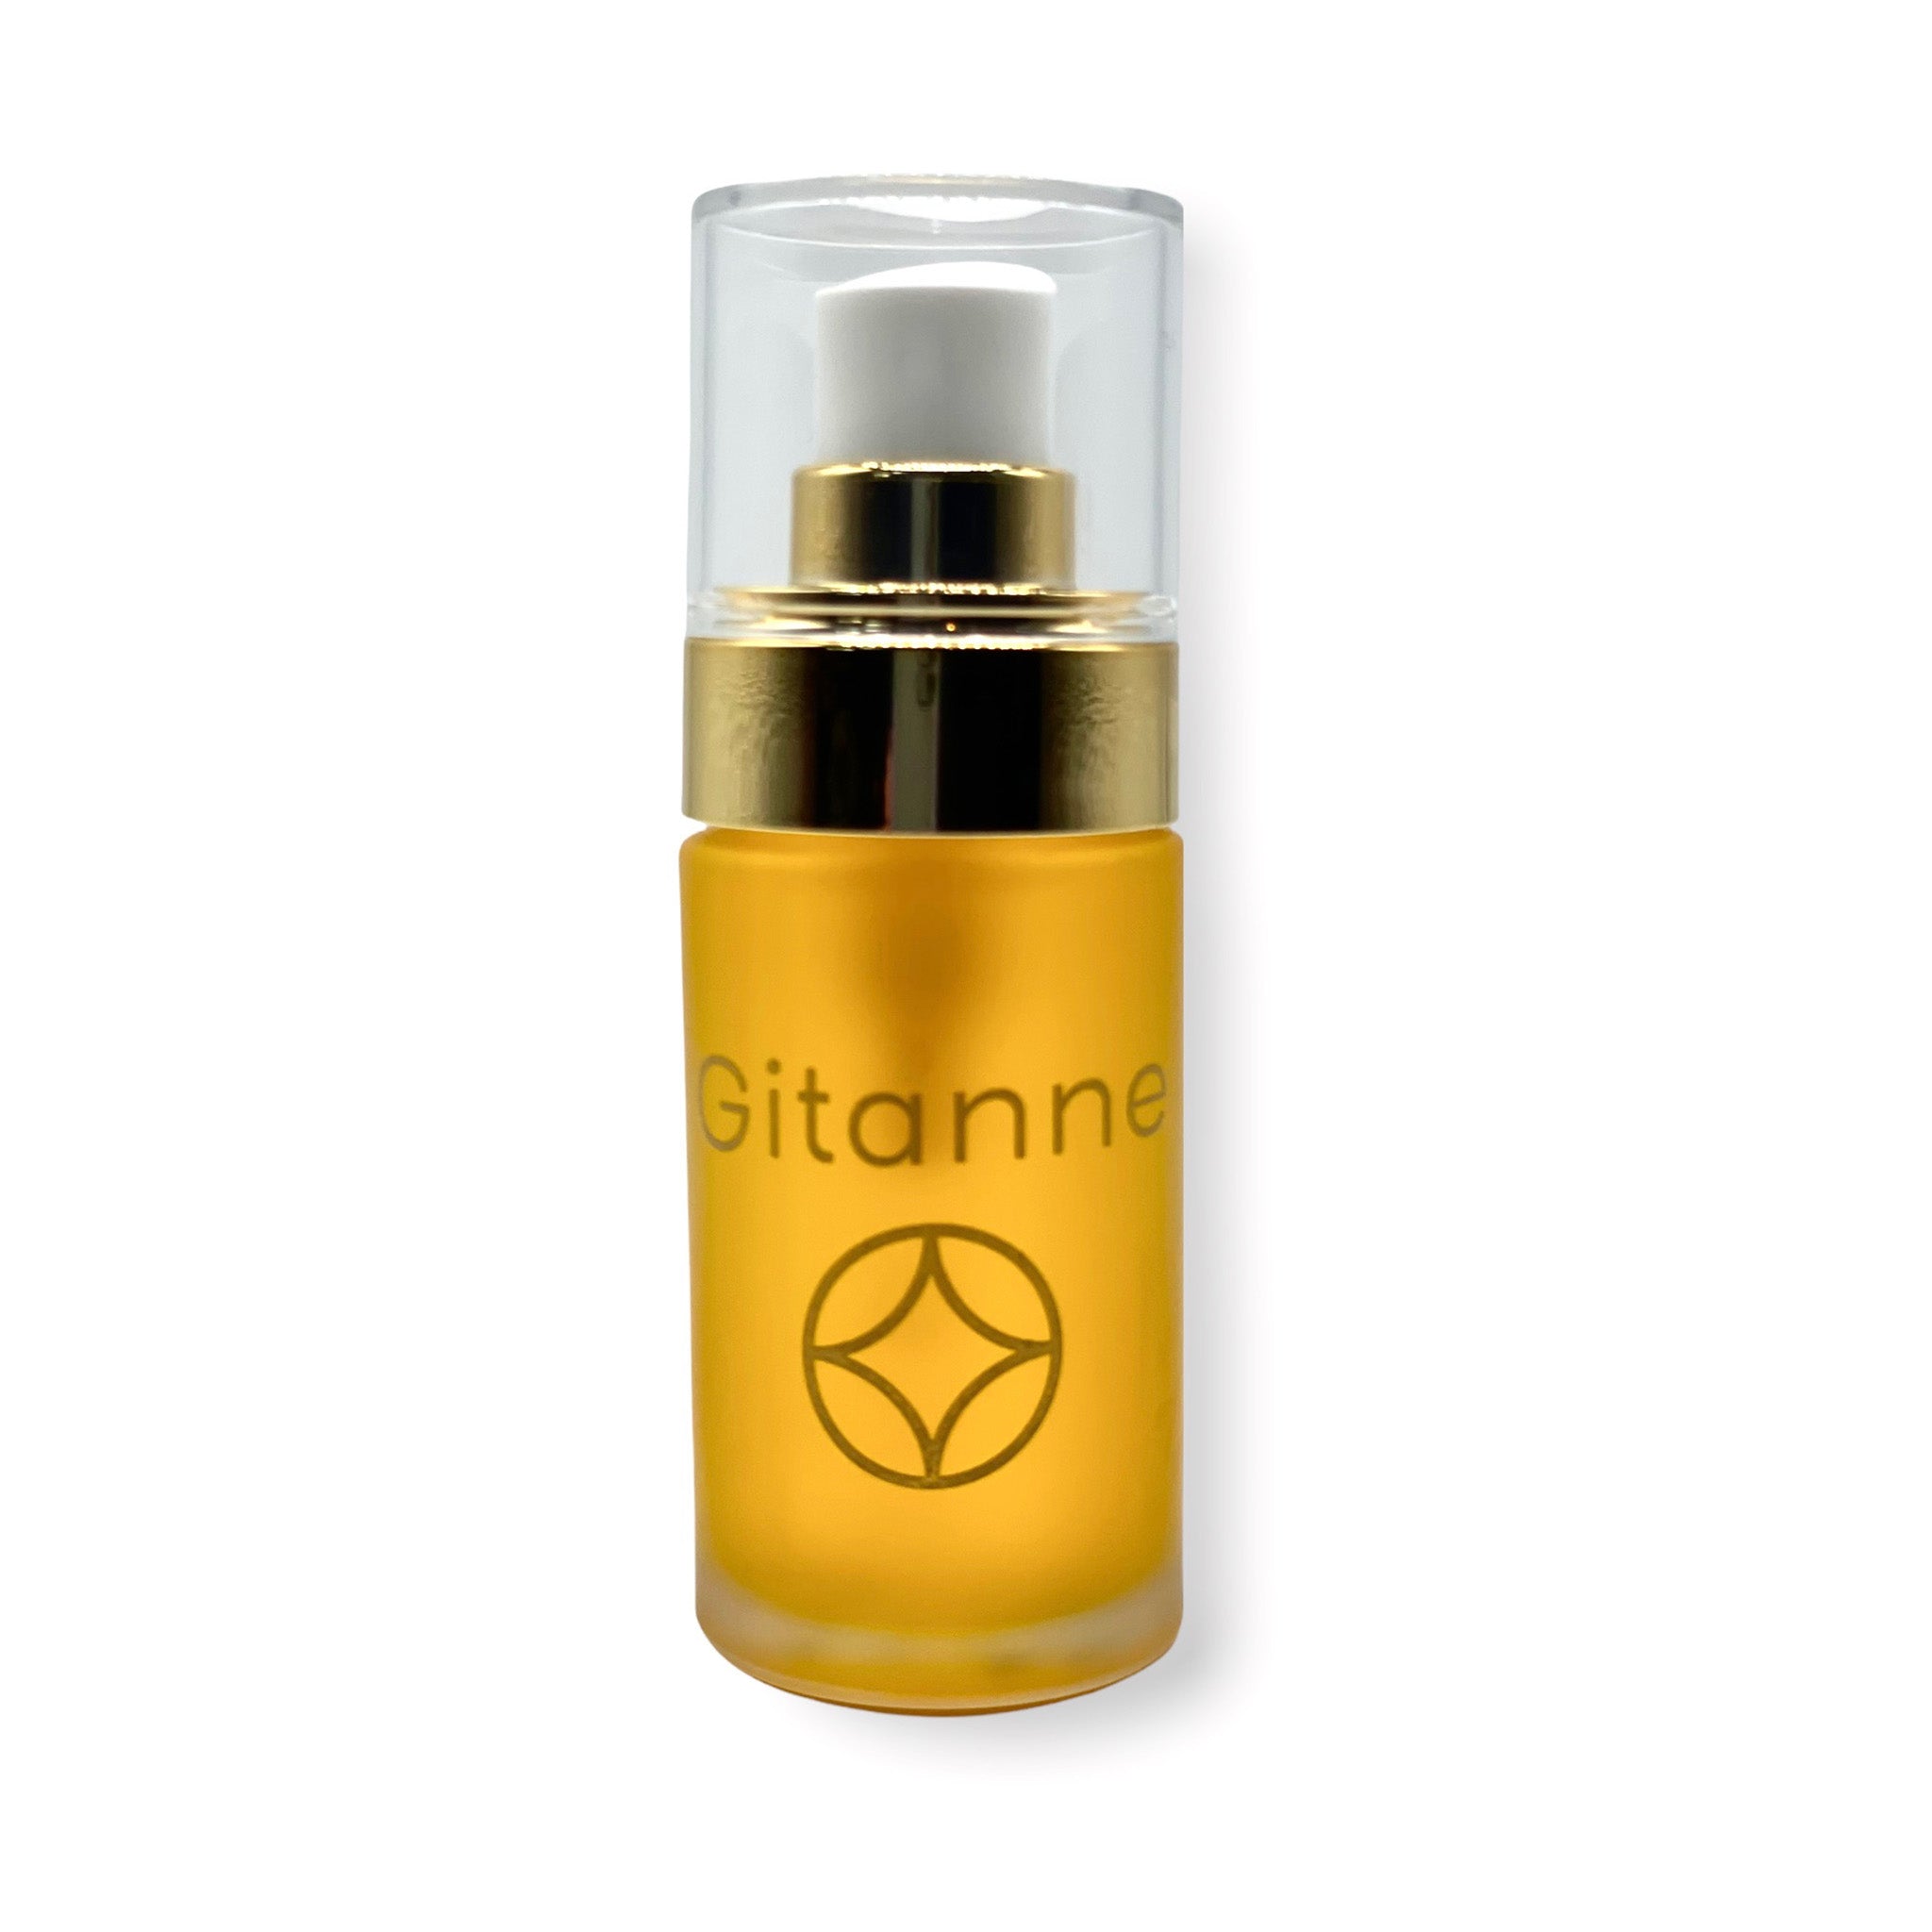 Gitanne Skincare Eternelle Face Serum will repair and replenish the skin leaving it dewy and supple.